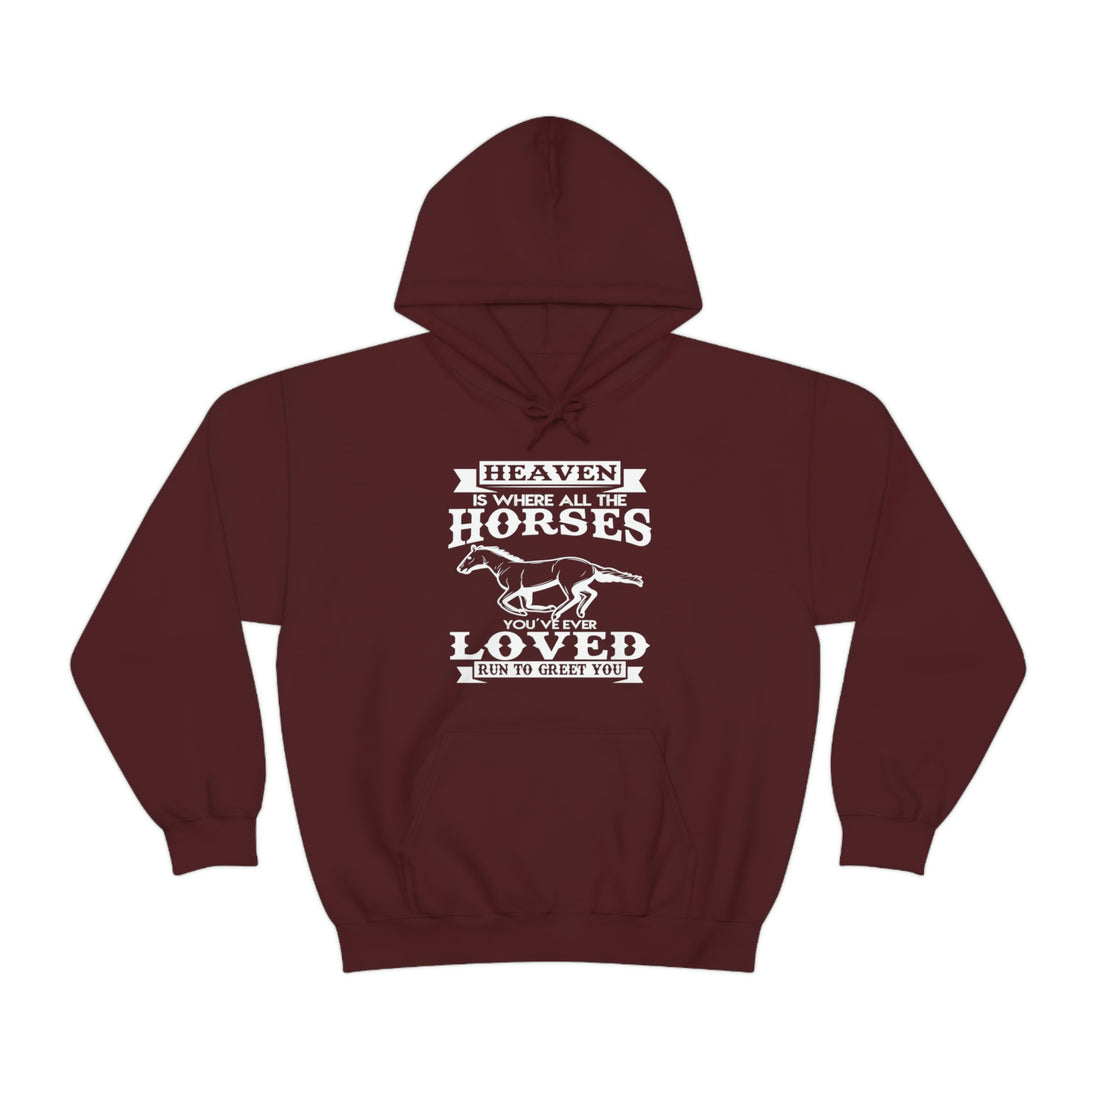 Heaven Is Where All The Horses You Have Ever Loved Join To Greet You - Unisex Heavy Blend™ Hooded Sweatshirt